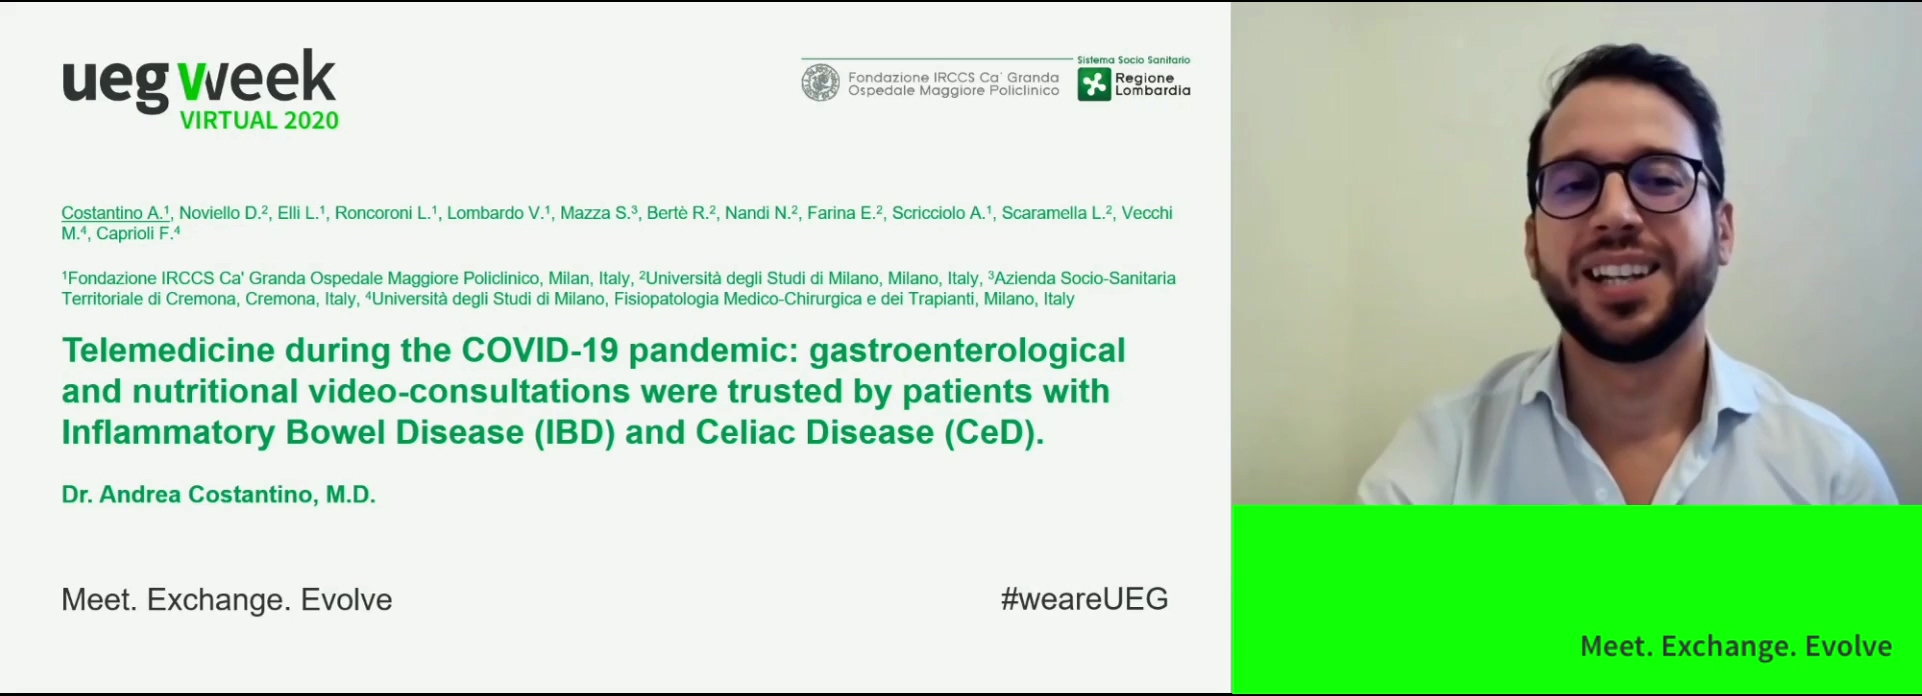 TELEMEDICINE DURING THE COVID-19 PANDEMIC: GASTROENTEROLOGICAL AND NUTRITIONAL VIDEO-CONSULTATIONS WERE TRUSTED BY PATIENTS WITH INFLAMMATORY BOWEL DISEASES (IBD) AND CELIAC DISEASE (CED)